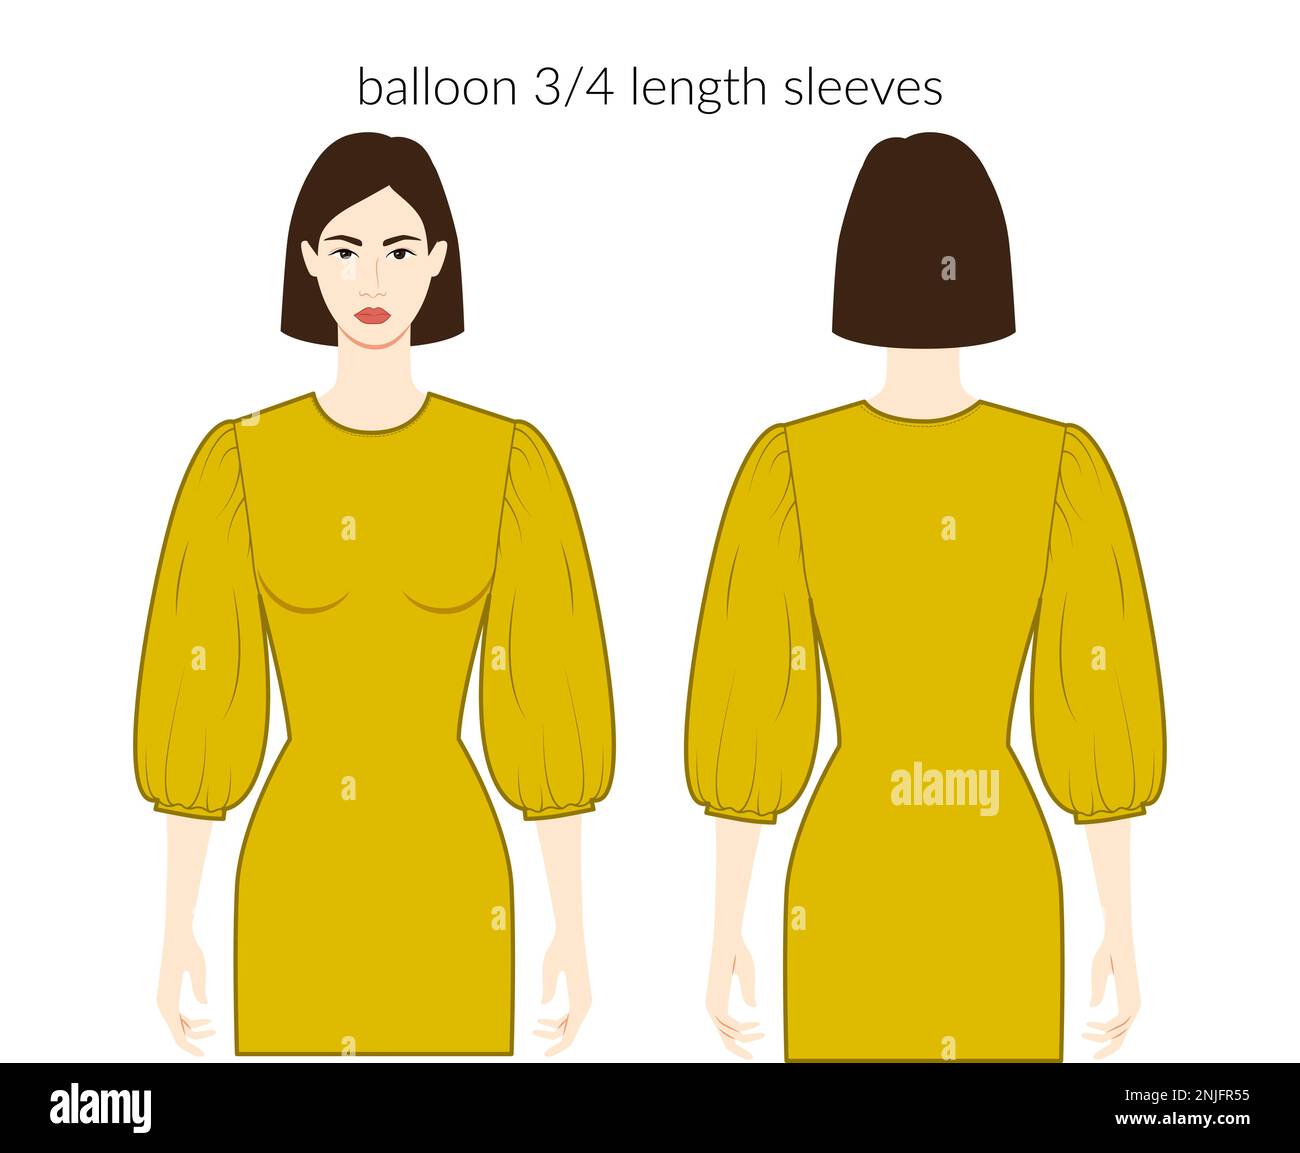 Balloon sleeves melon clothes character beautiful lady in ochre top, shirt, dress technical fashion illustration with 3-4 bracelet length. Flat apparel template front, back sides. Women men CAD mockup Stock Vector